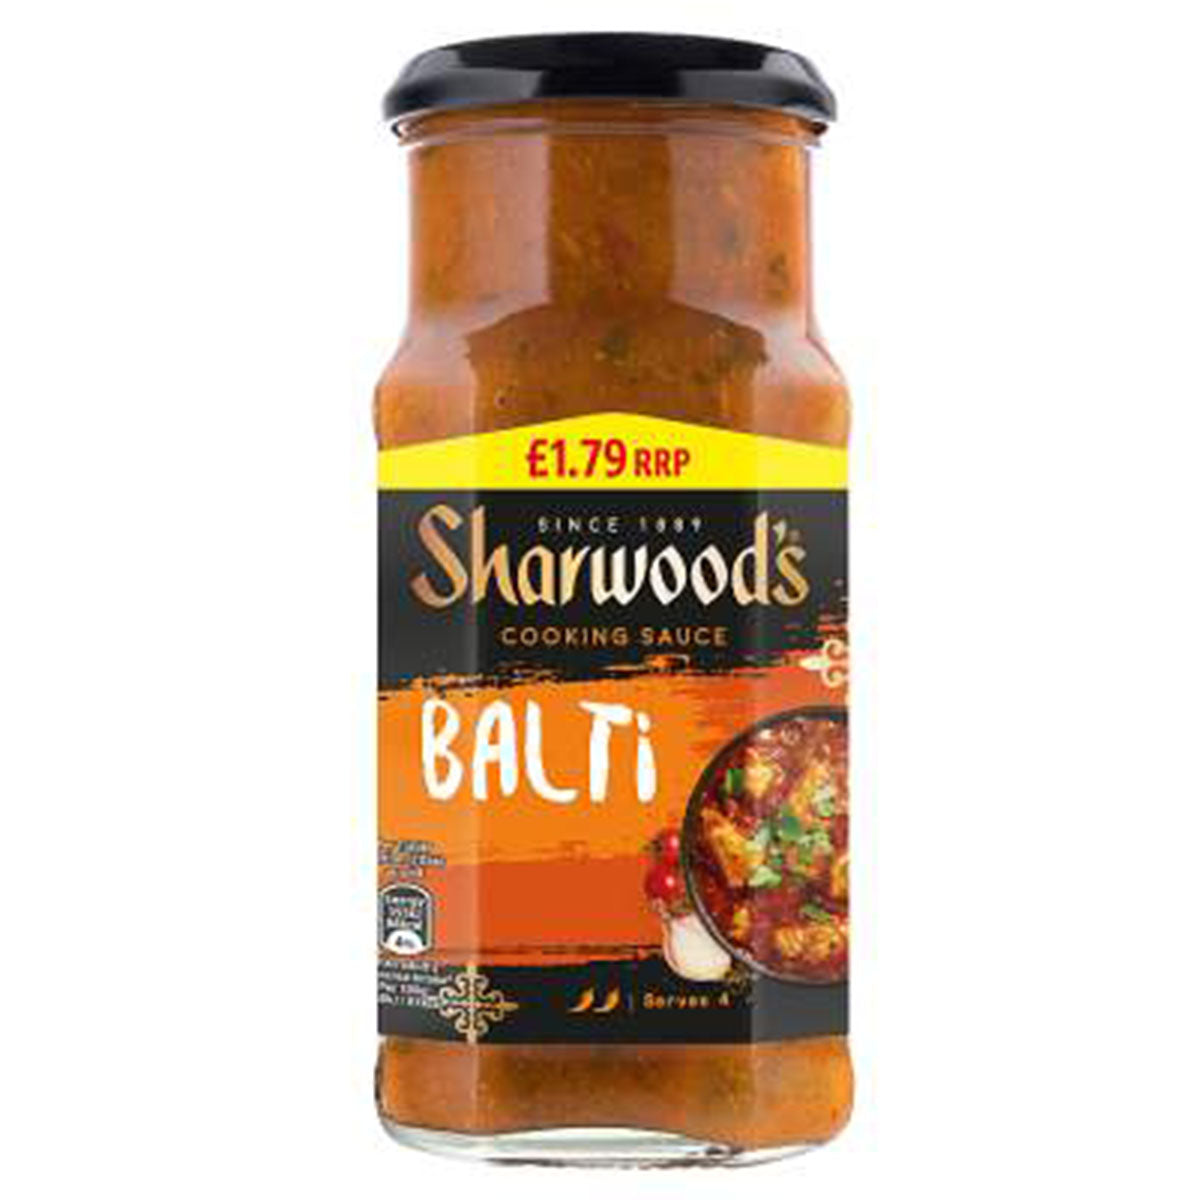 Sharwood's - Balti Cooking Sauce - 420g - Continental Food Store